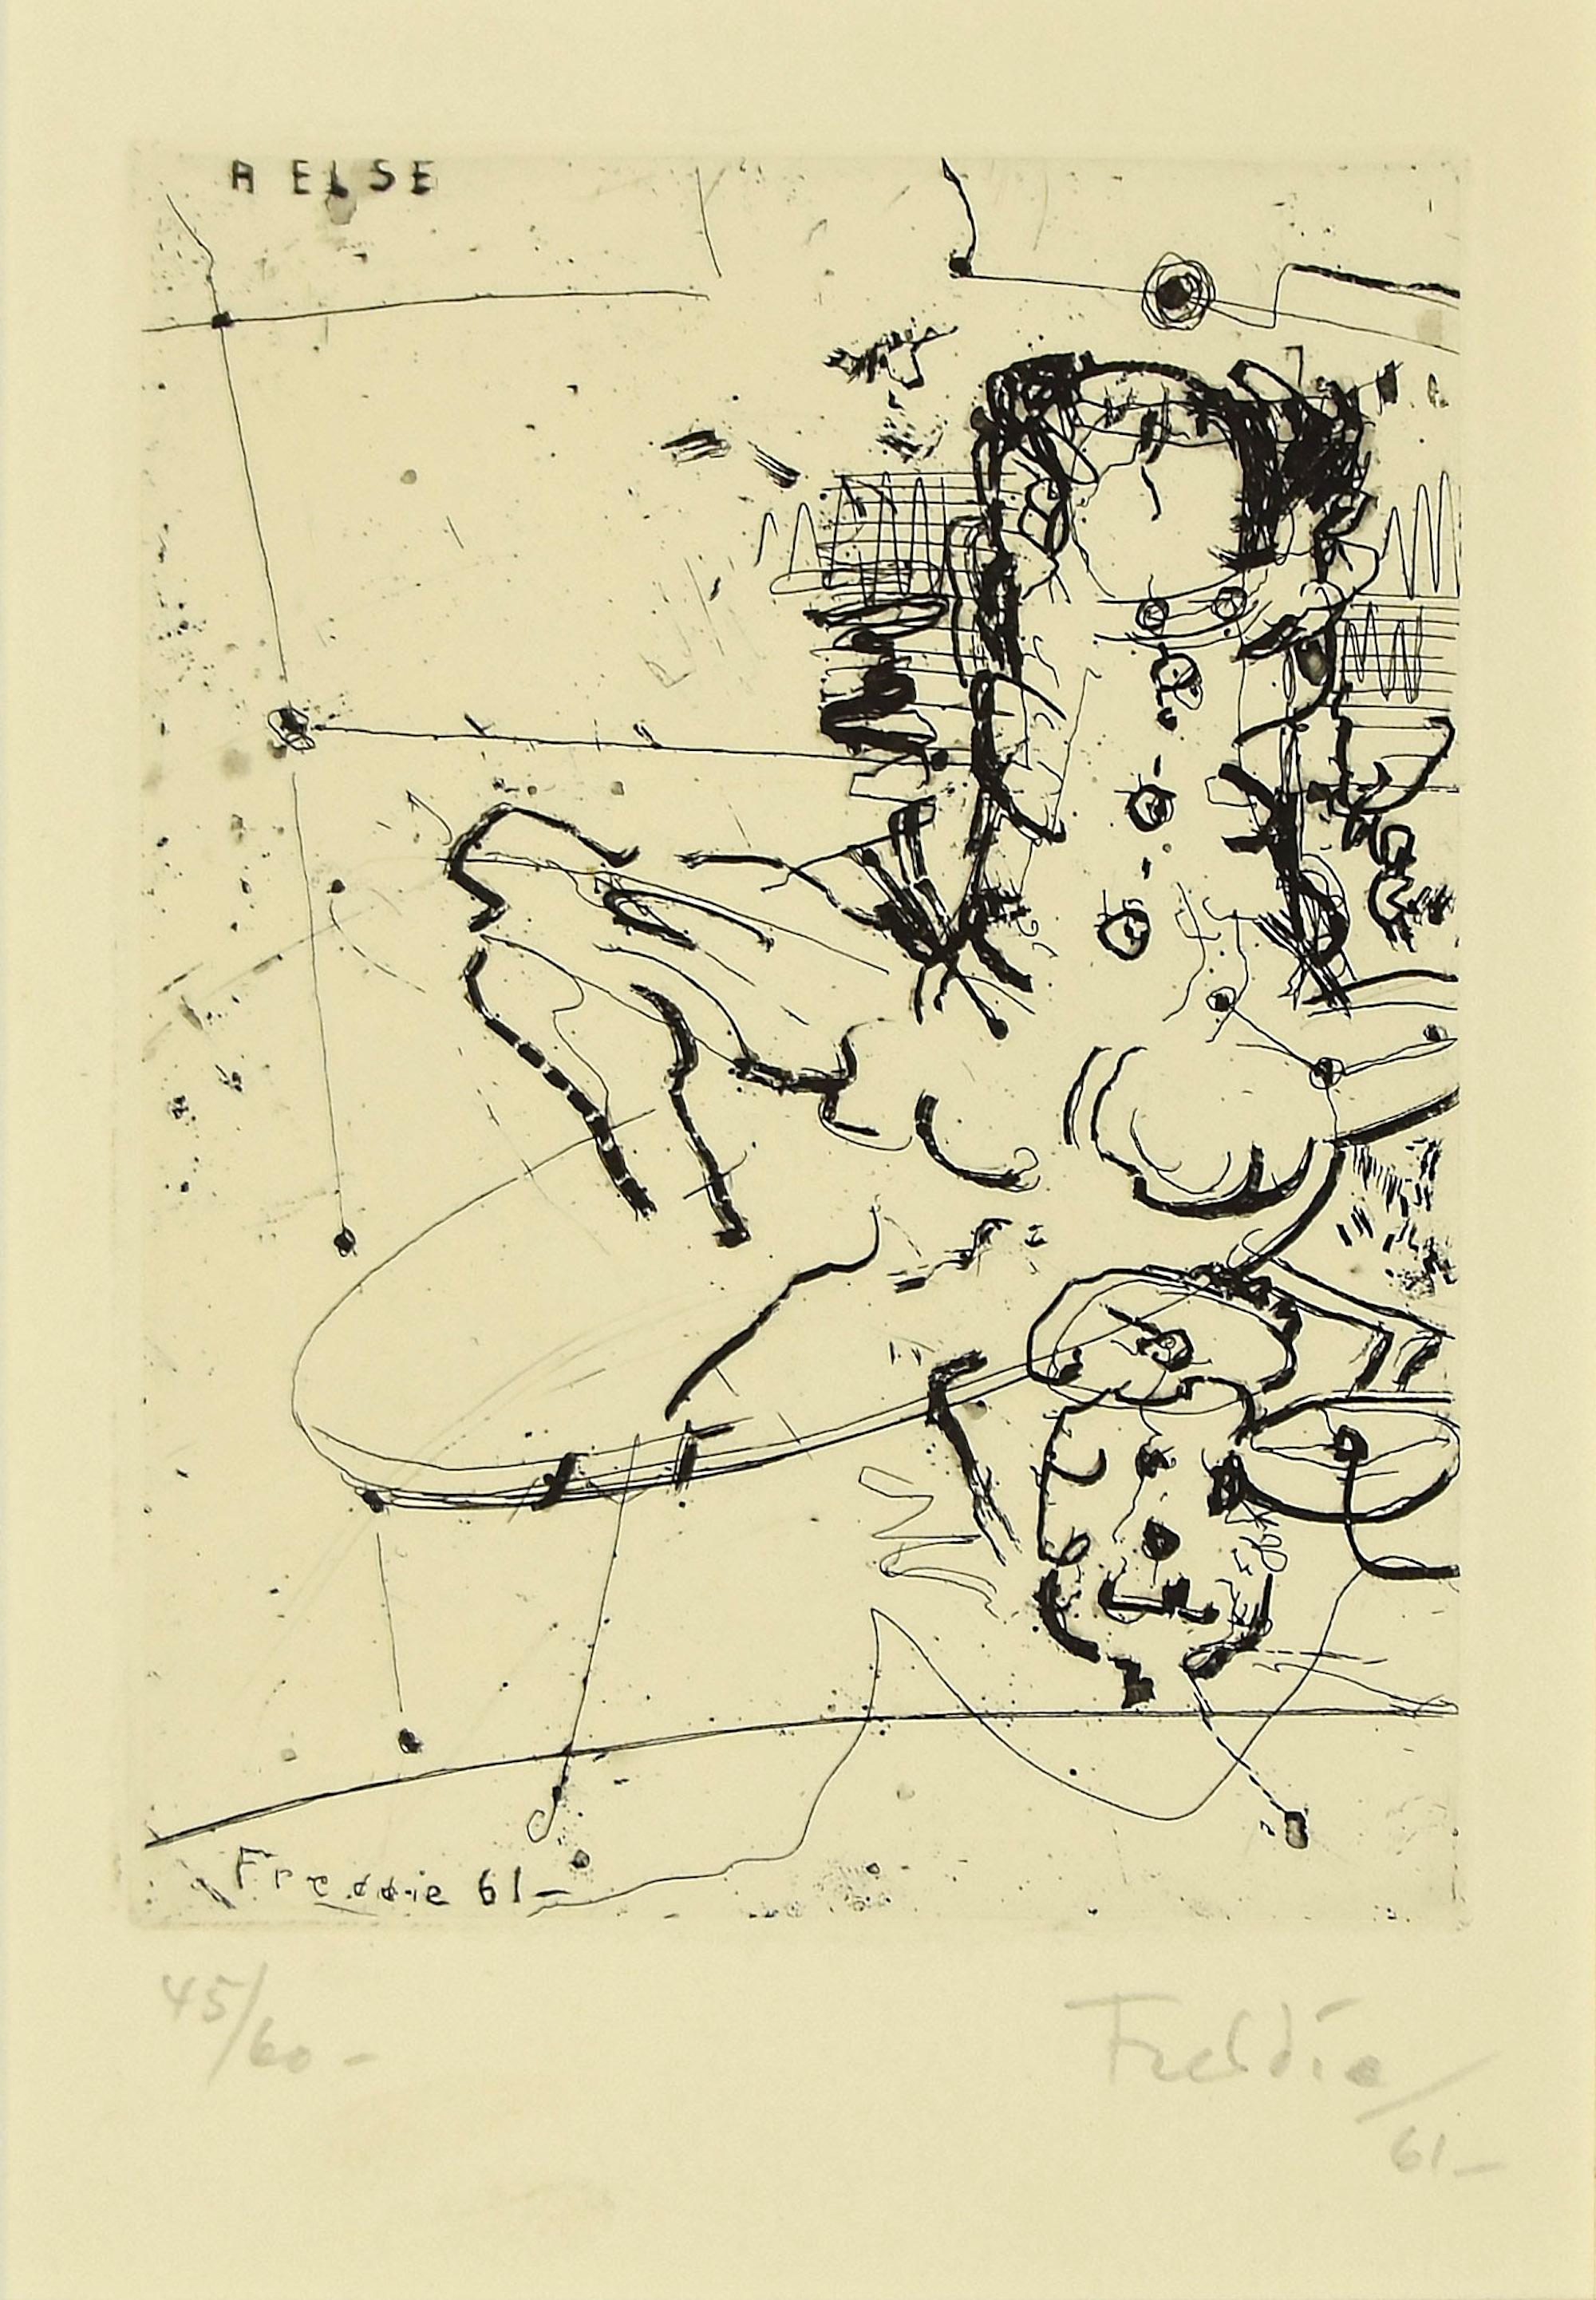 Composition - Etching by W. Freddie - 1961